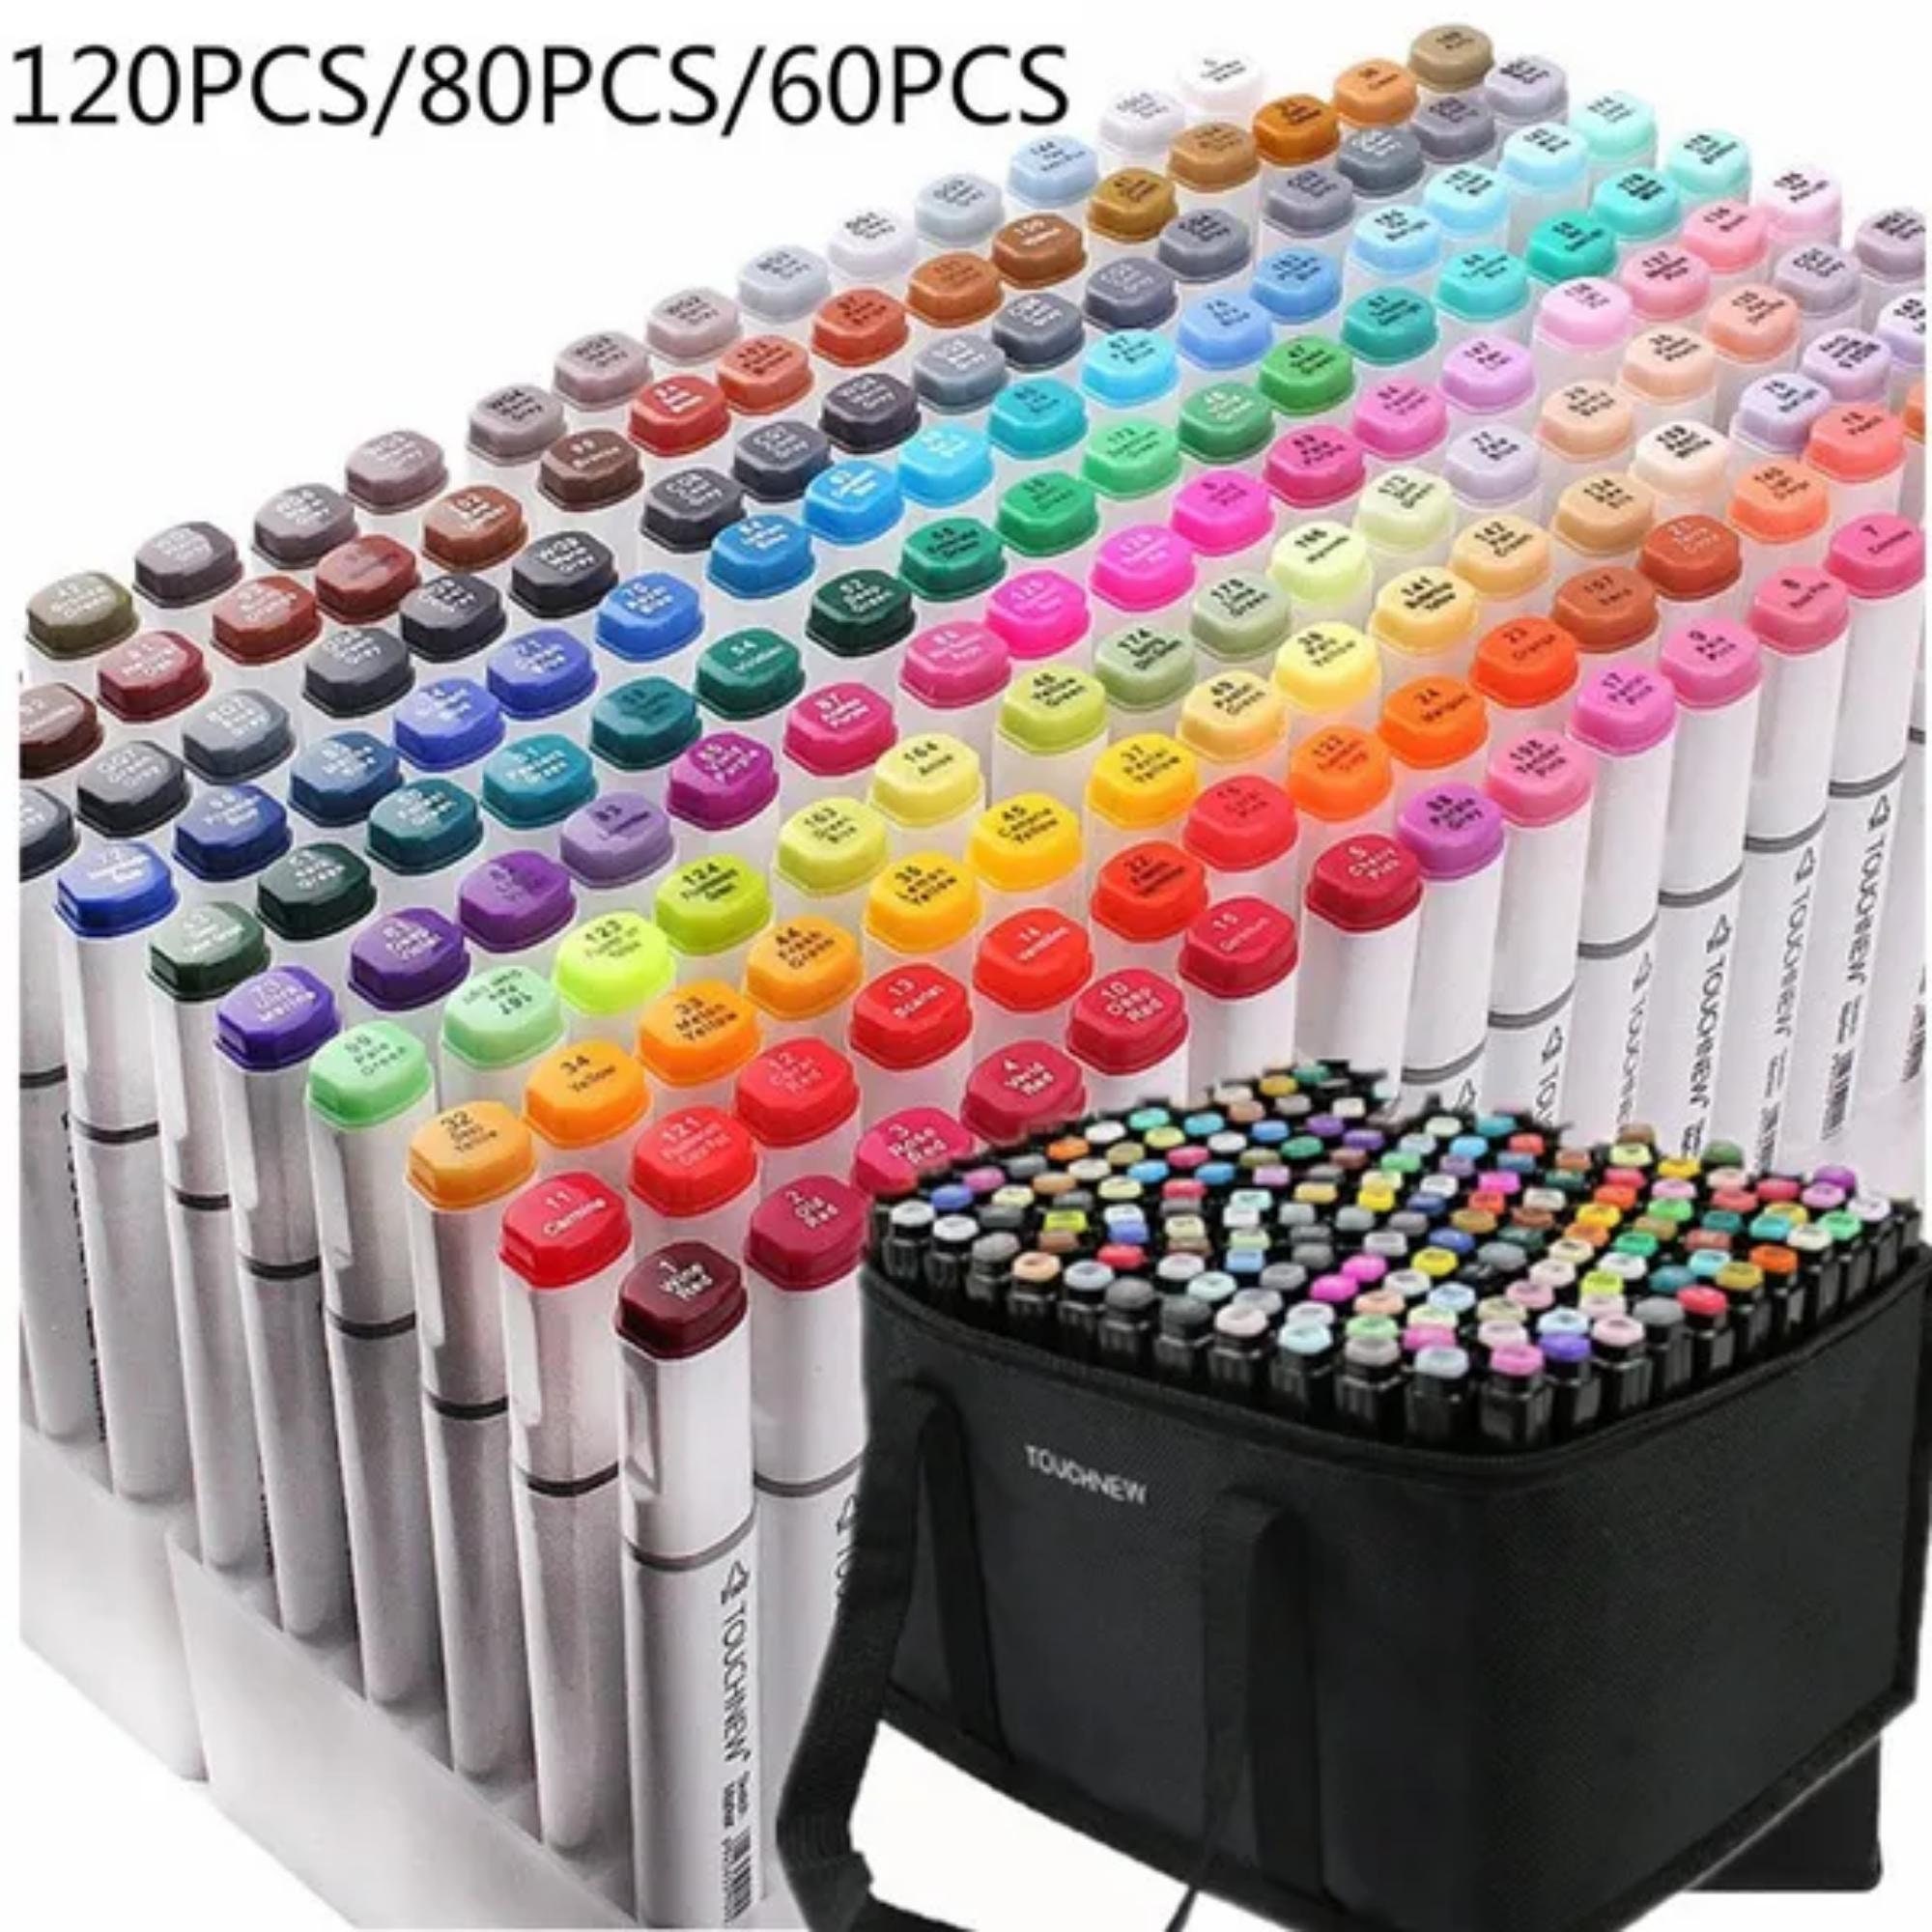 Copic Marker Storage TYPE 1 Organizer for Copic Art Carrying Case insert  Only 